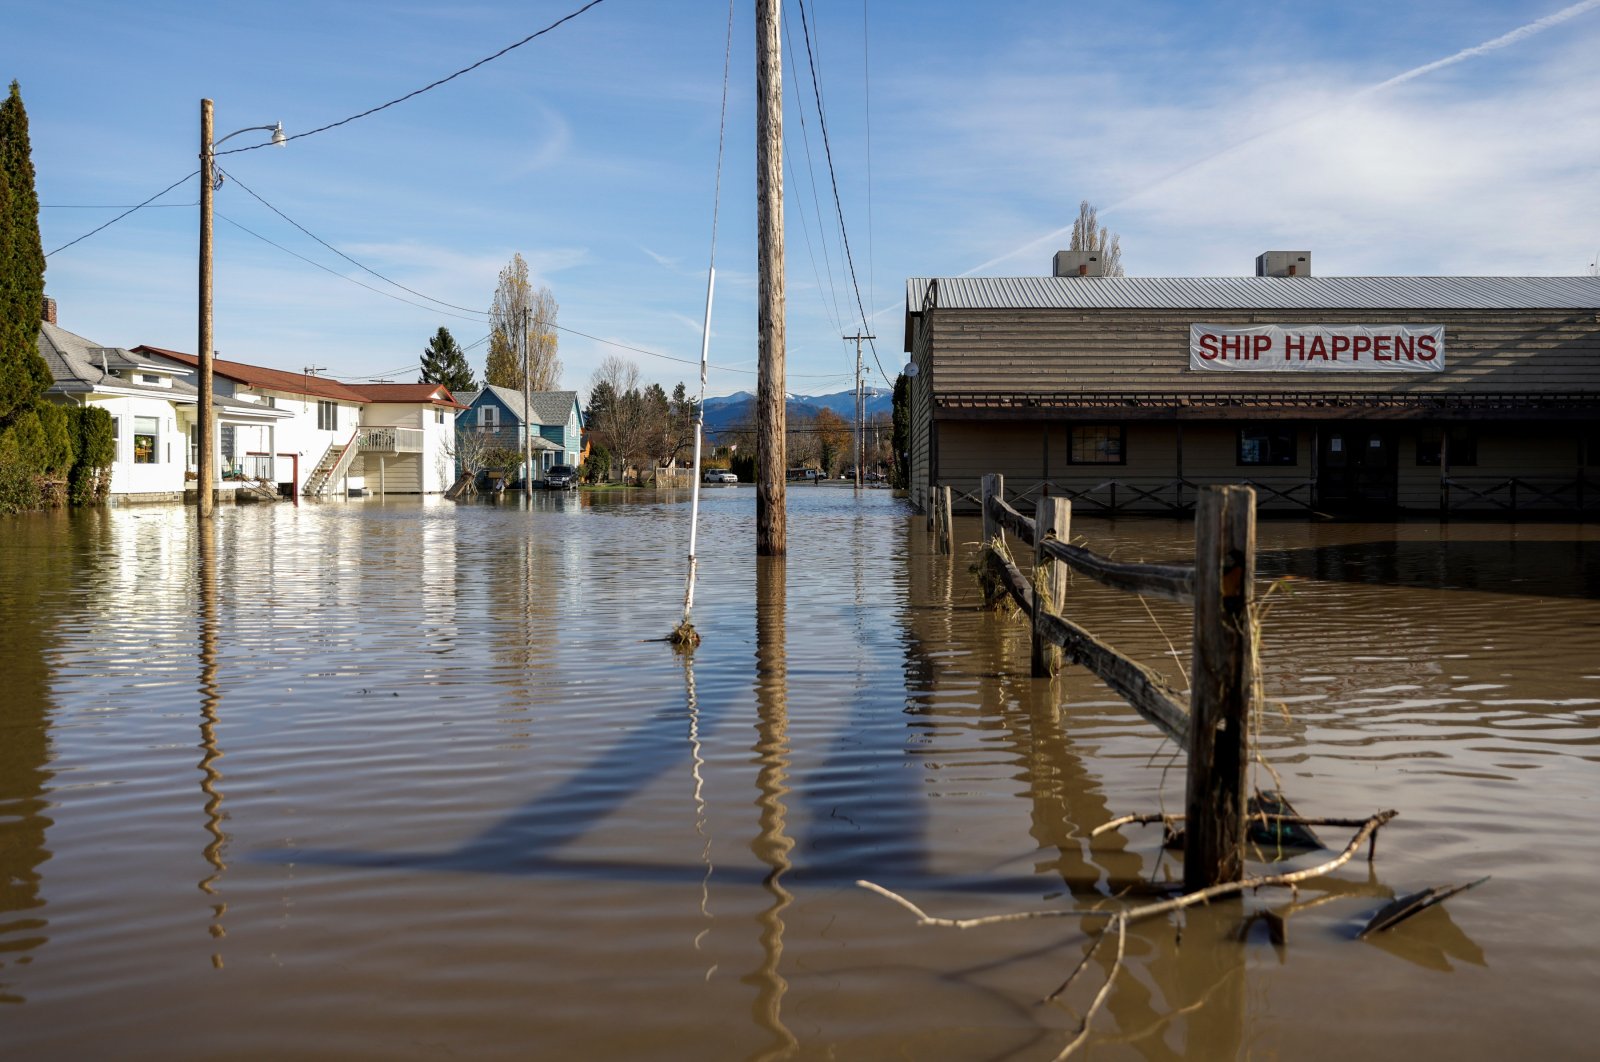 Flood waters surround a shipping business called &quot;Ship Happens&quot; after rainstorms that hit both British Columbia and Washington state caused flooding on both sides of the border, in Sumas, Washington, U.S., Nov. 17, 2021.  (Reuters Photo)